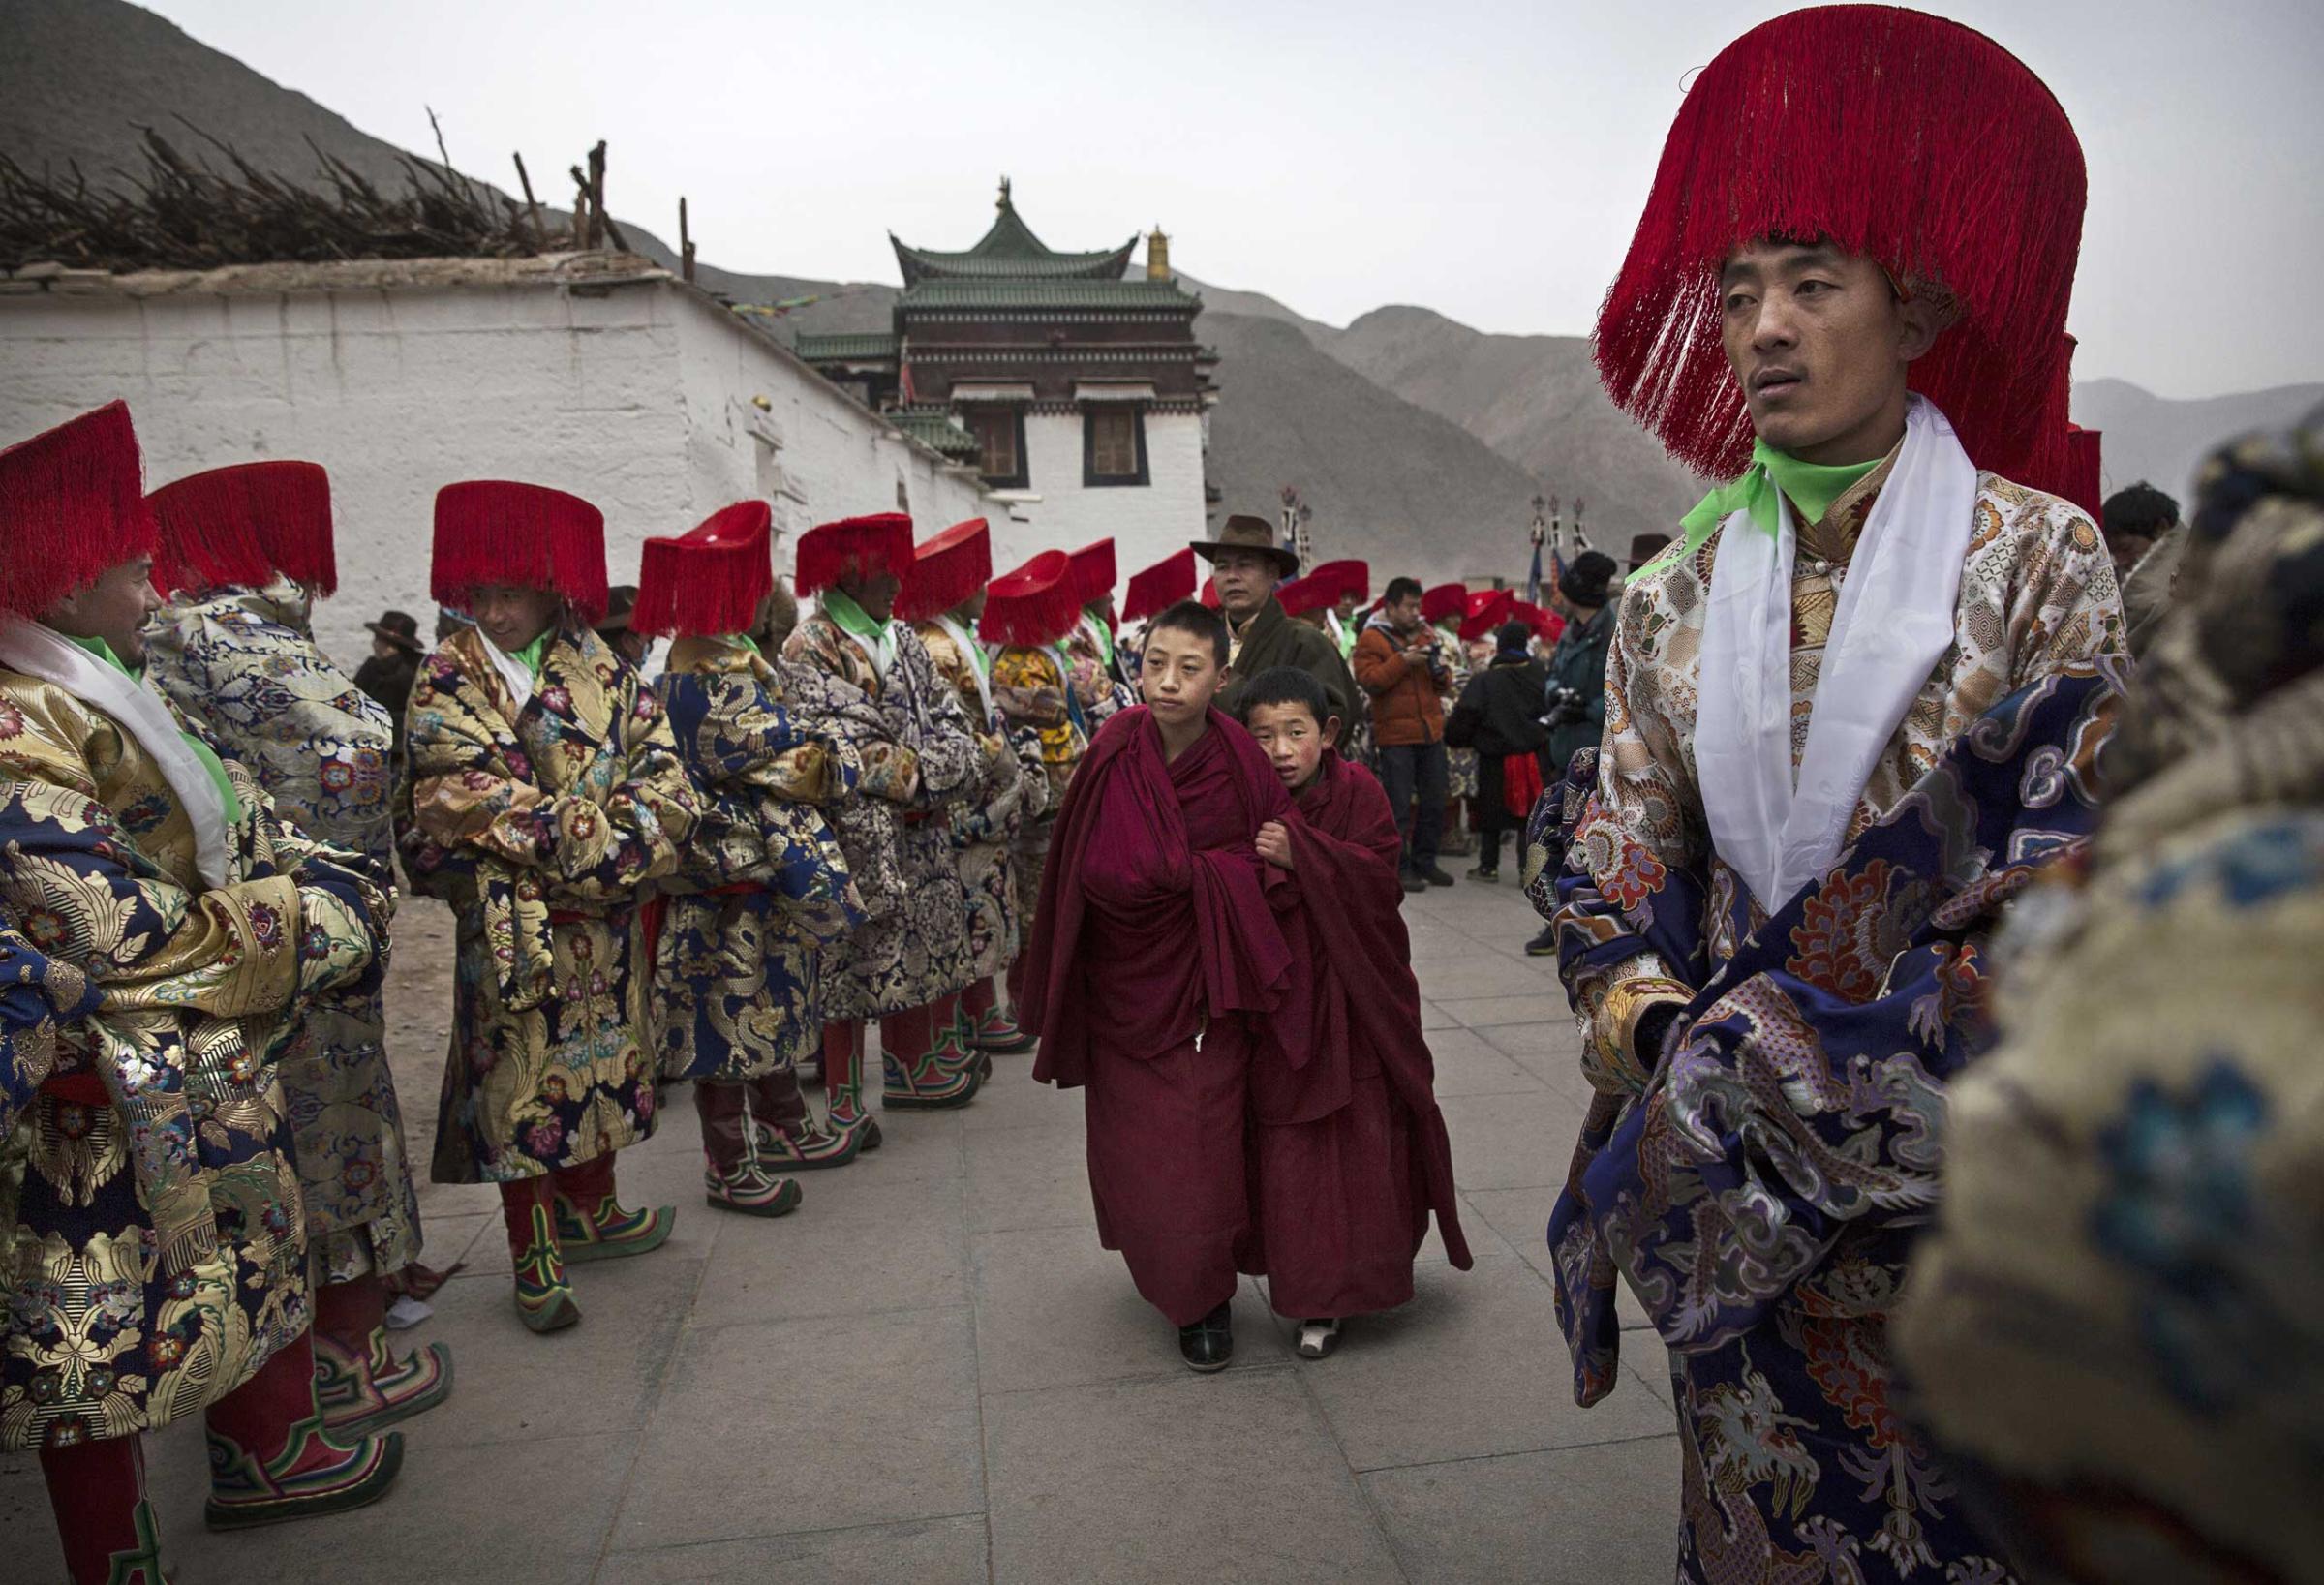 Two young Tibetan Buddhist monks of the Gelug, or Yellow Hat order, walk passed men in traditional clothing before a procession during Monlam or the Great Prayer rituals on March 4, 2015 at the Labrang Monastery.